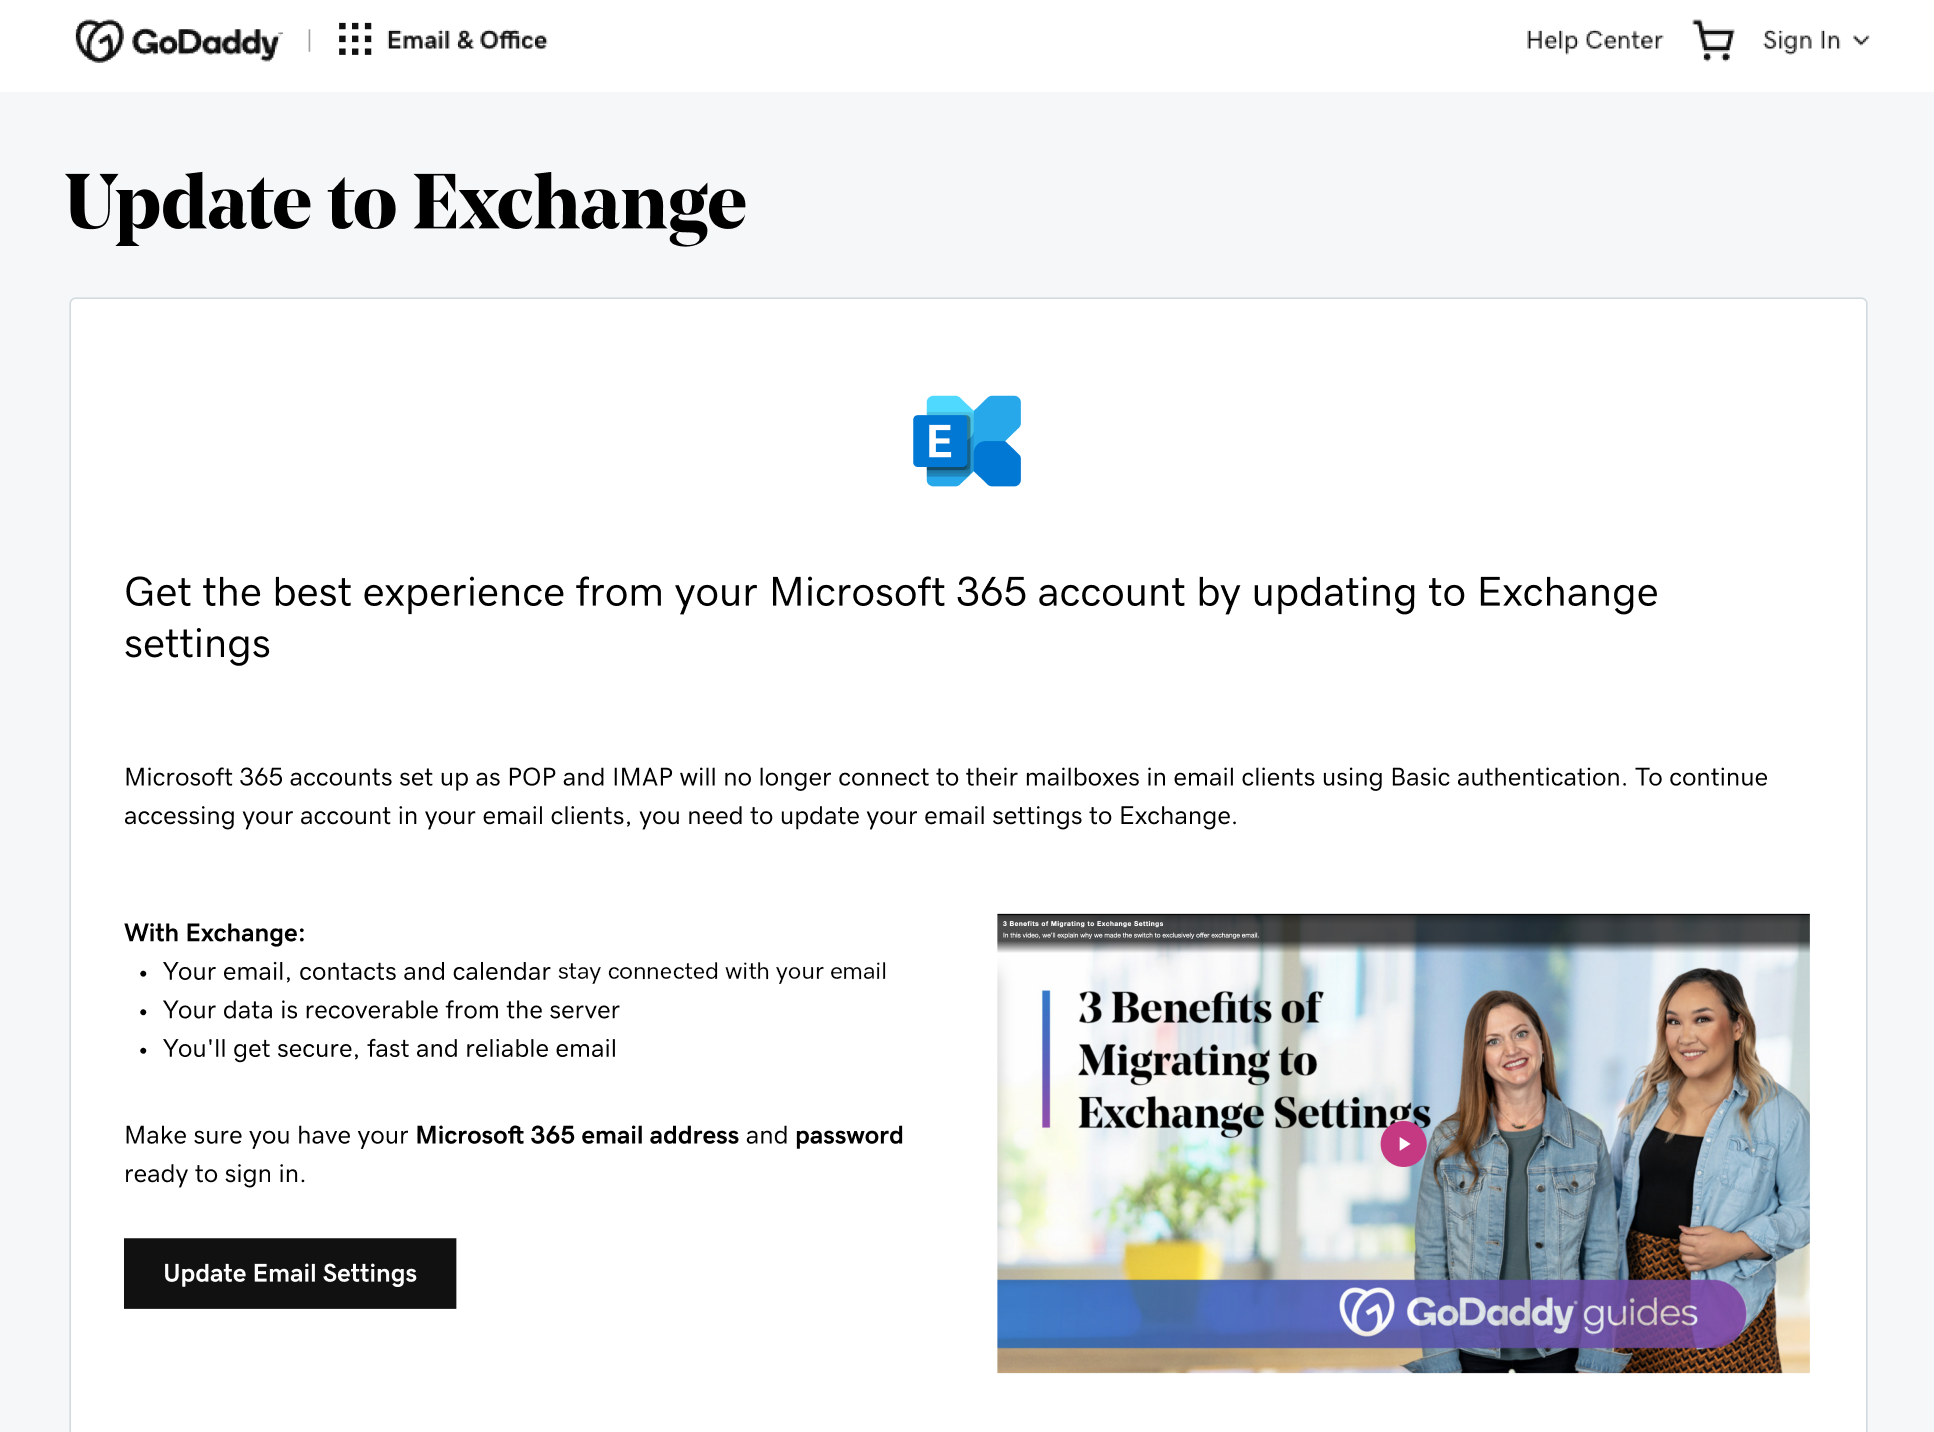 update-to-exchange-landing-page